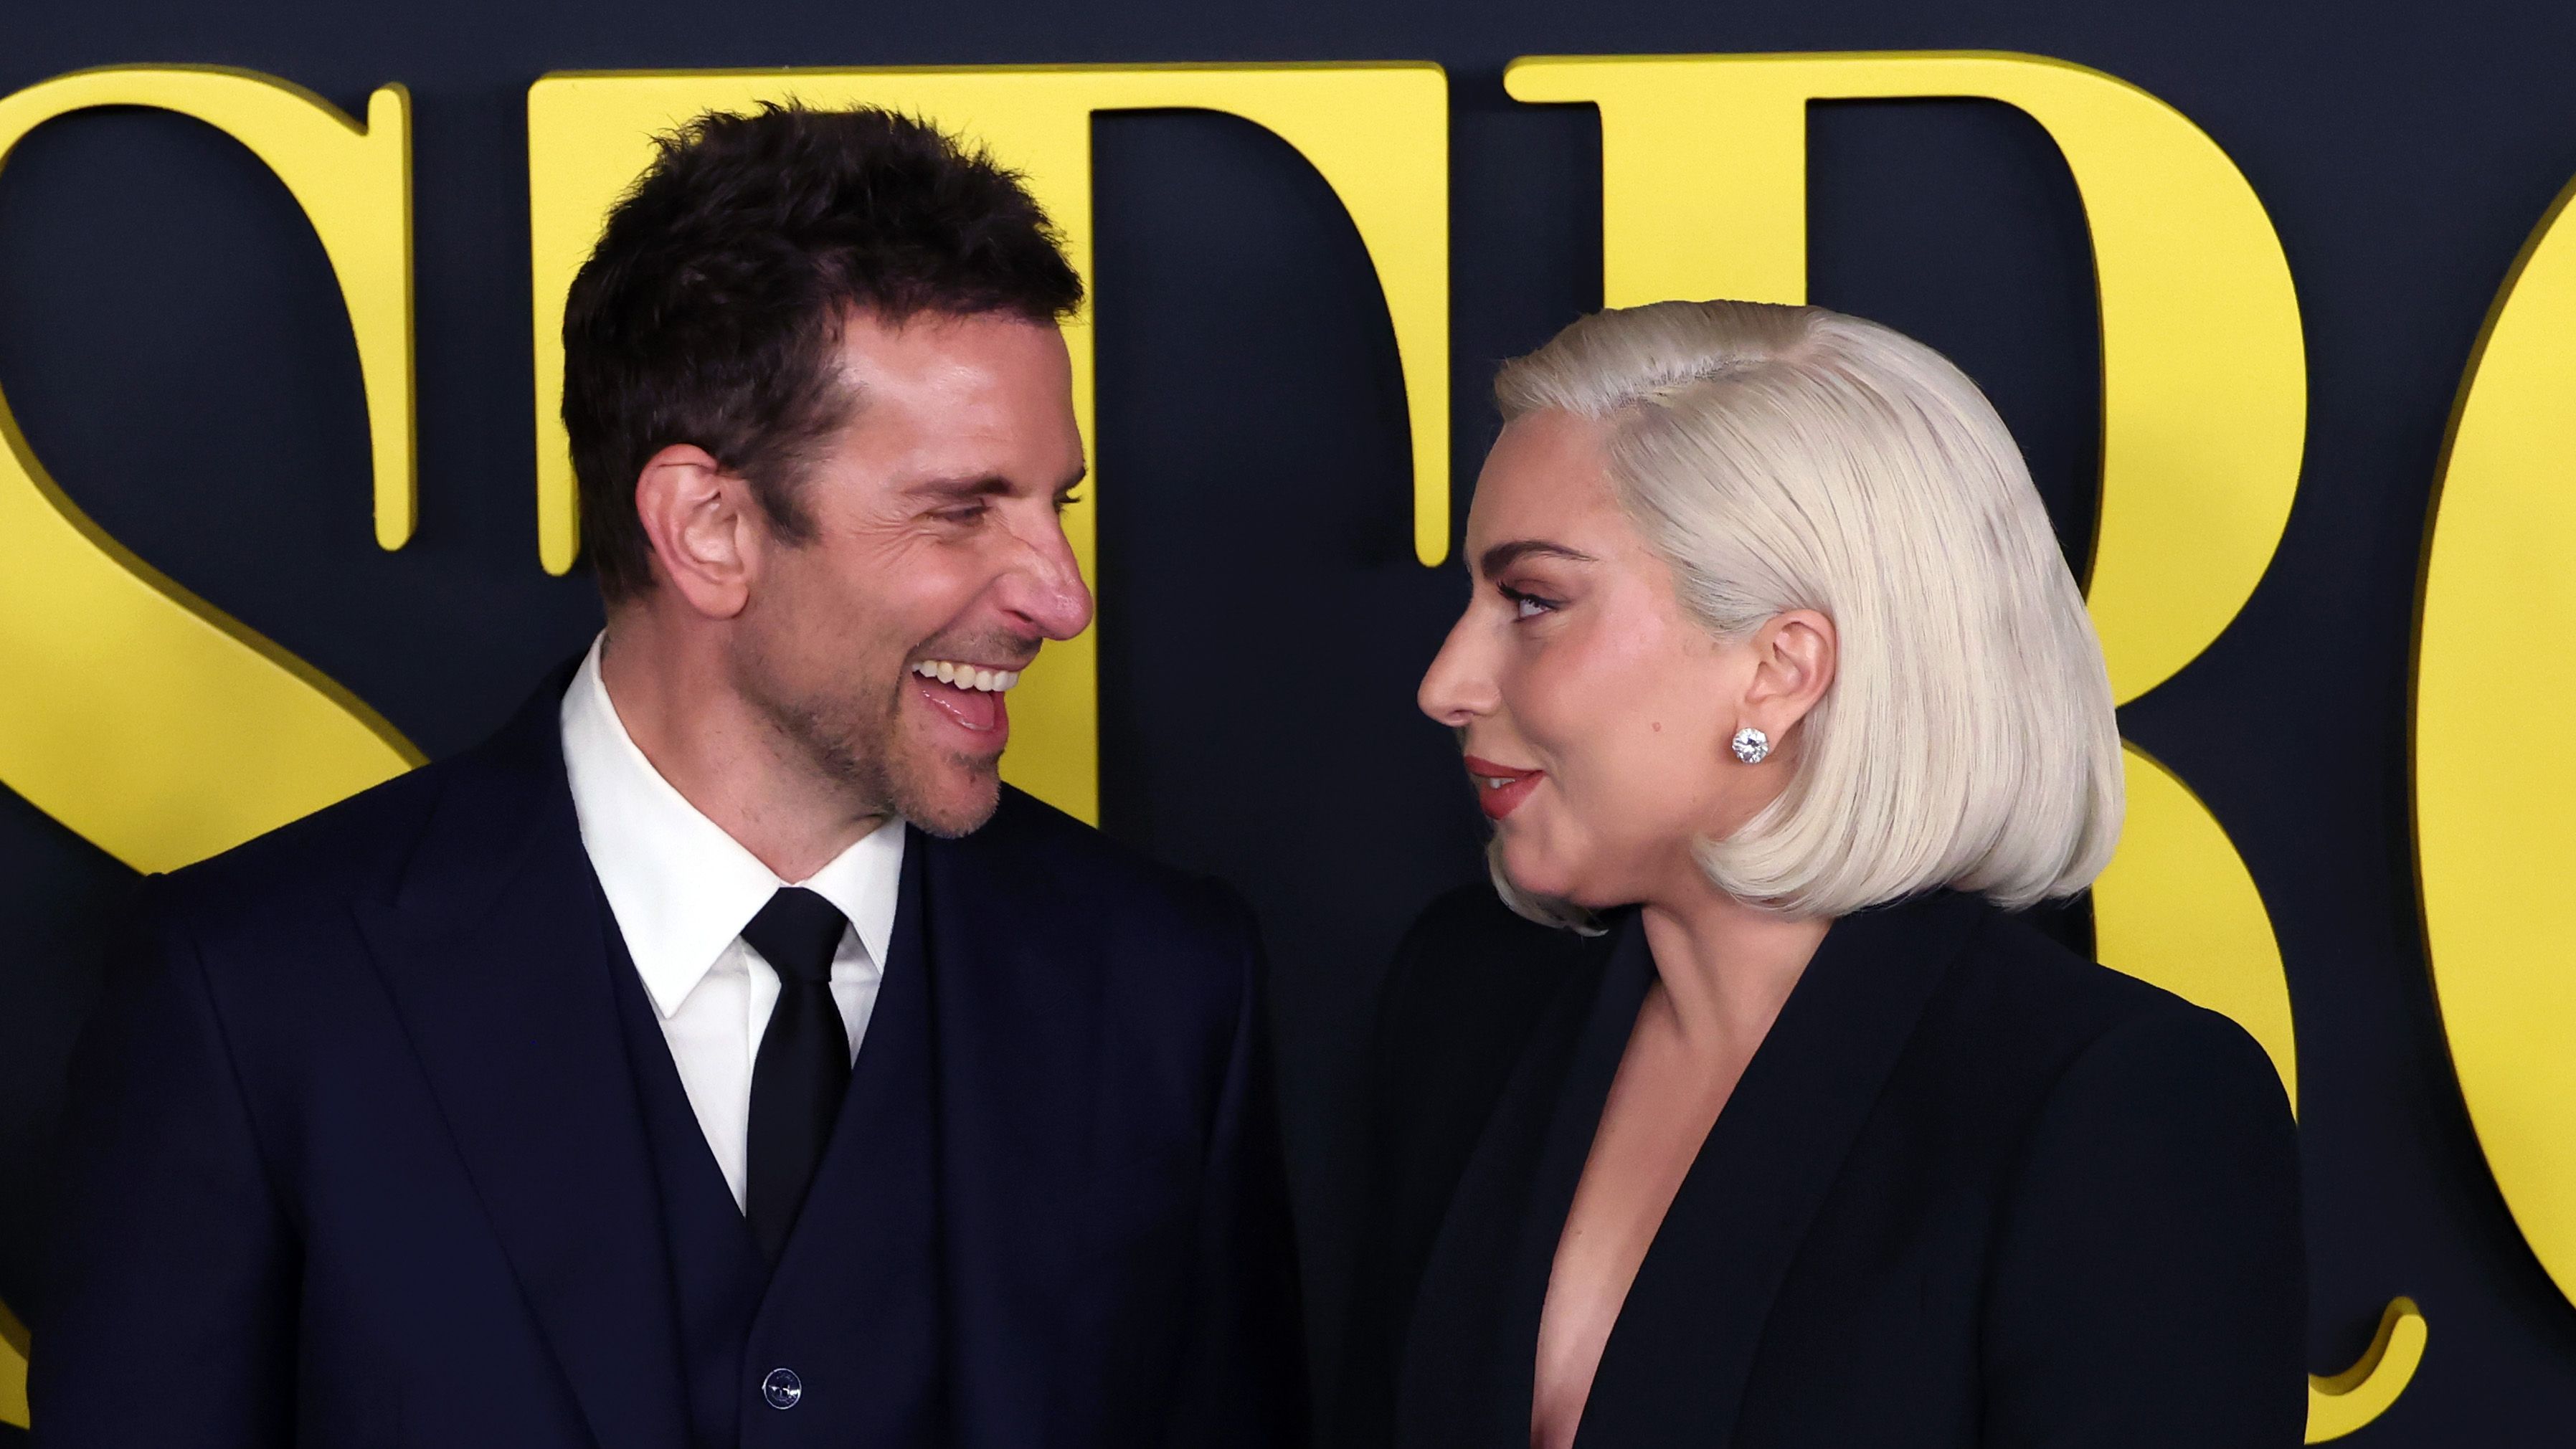 https://hips.hearstapps.com/hmg-prod/images/bradley-cooper-and-lady-gaga-attend-netflixs-maestro-los-news-photo-1702475829.jpg?crop=1xw:0.76913xh;center,top